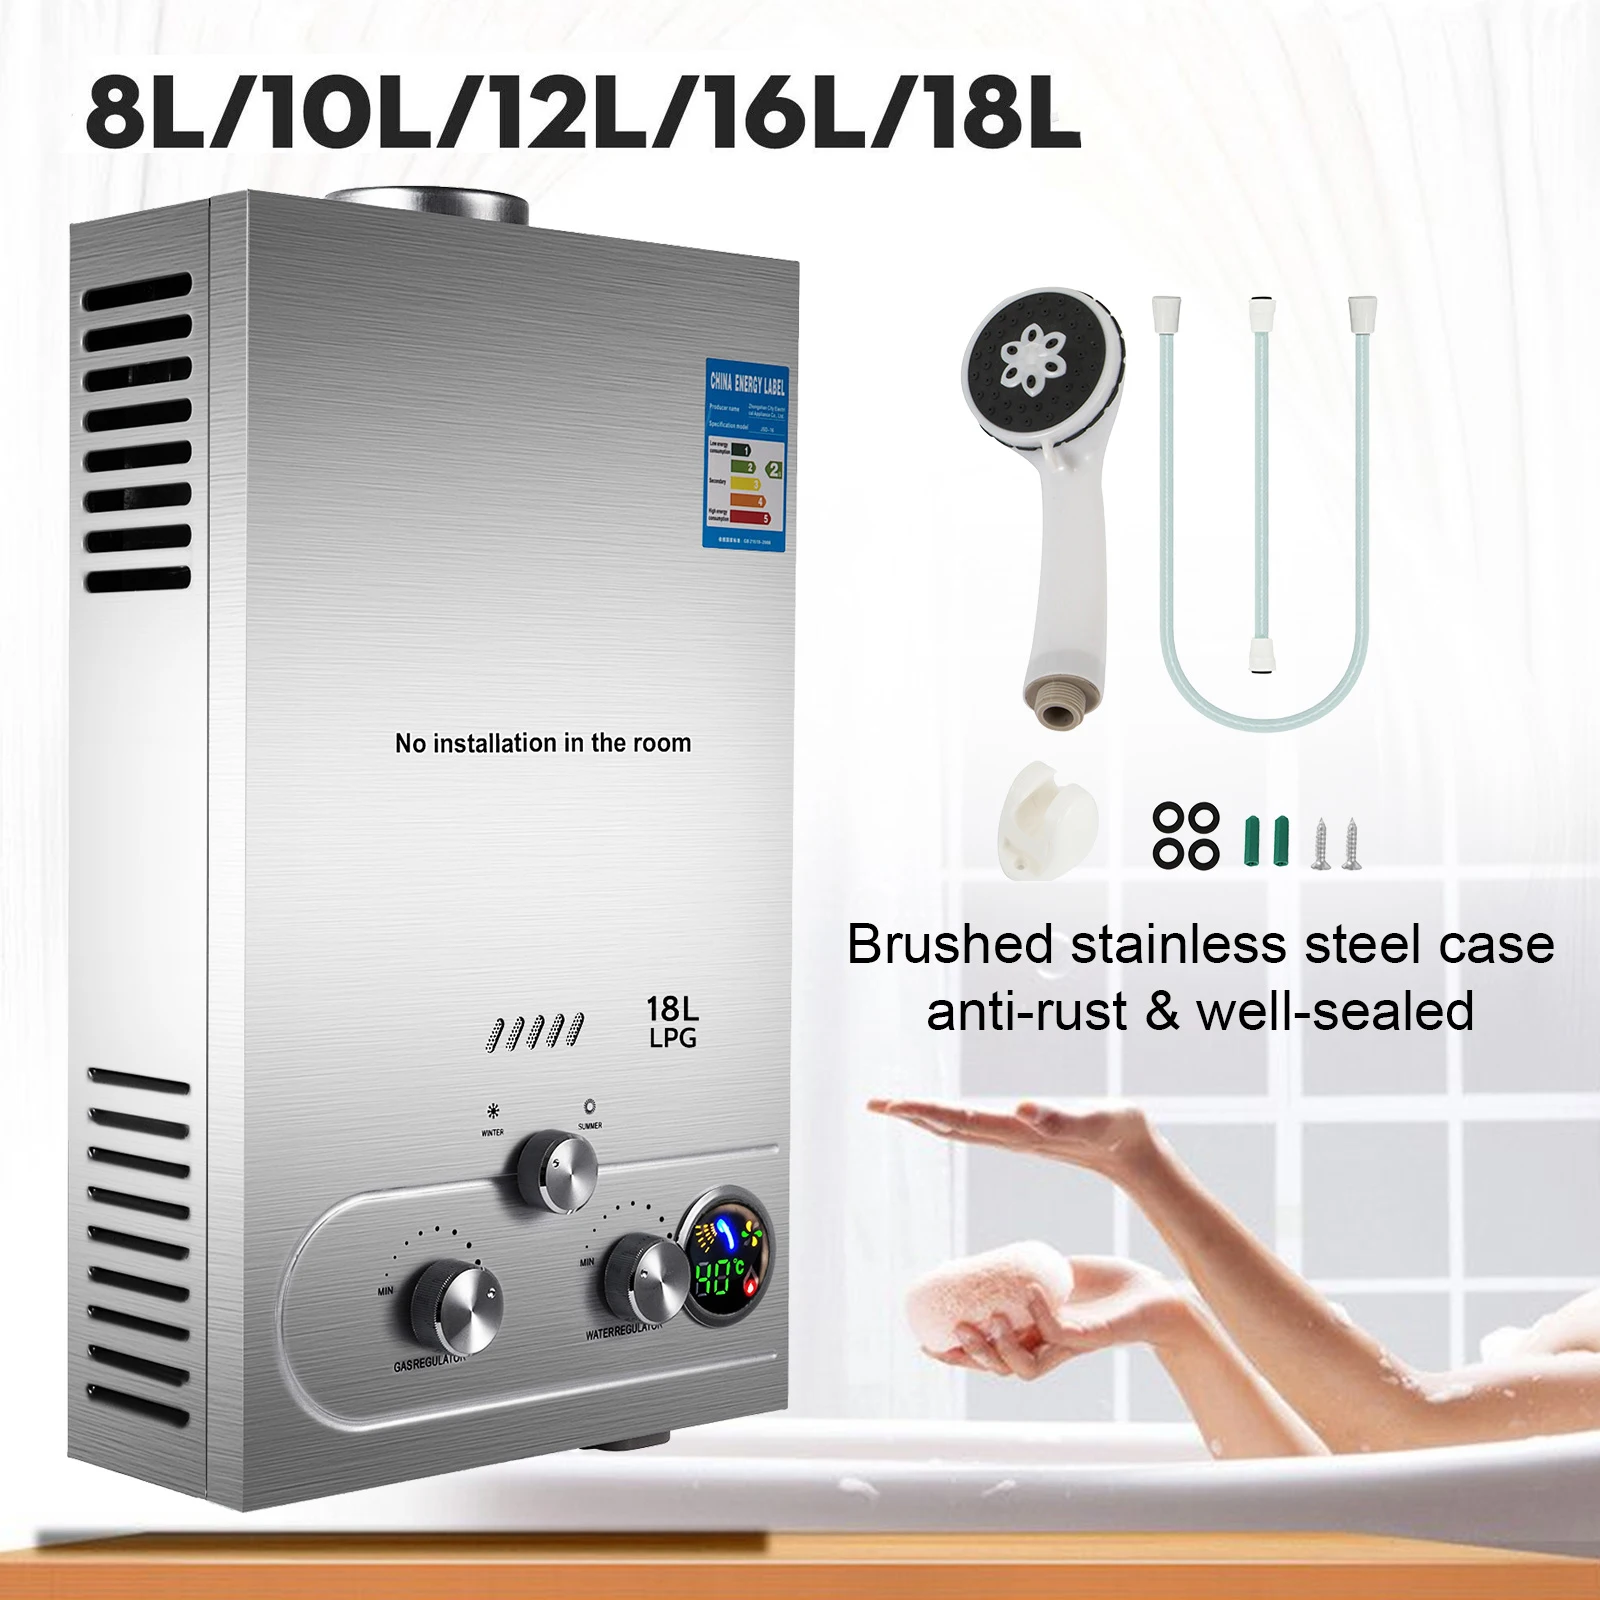 Details about   6L Propane LPG Gas Hot Water Heater Instant Boiler On Demand Tankless w/ Shower 